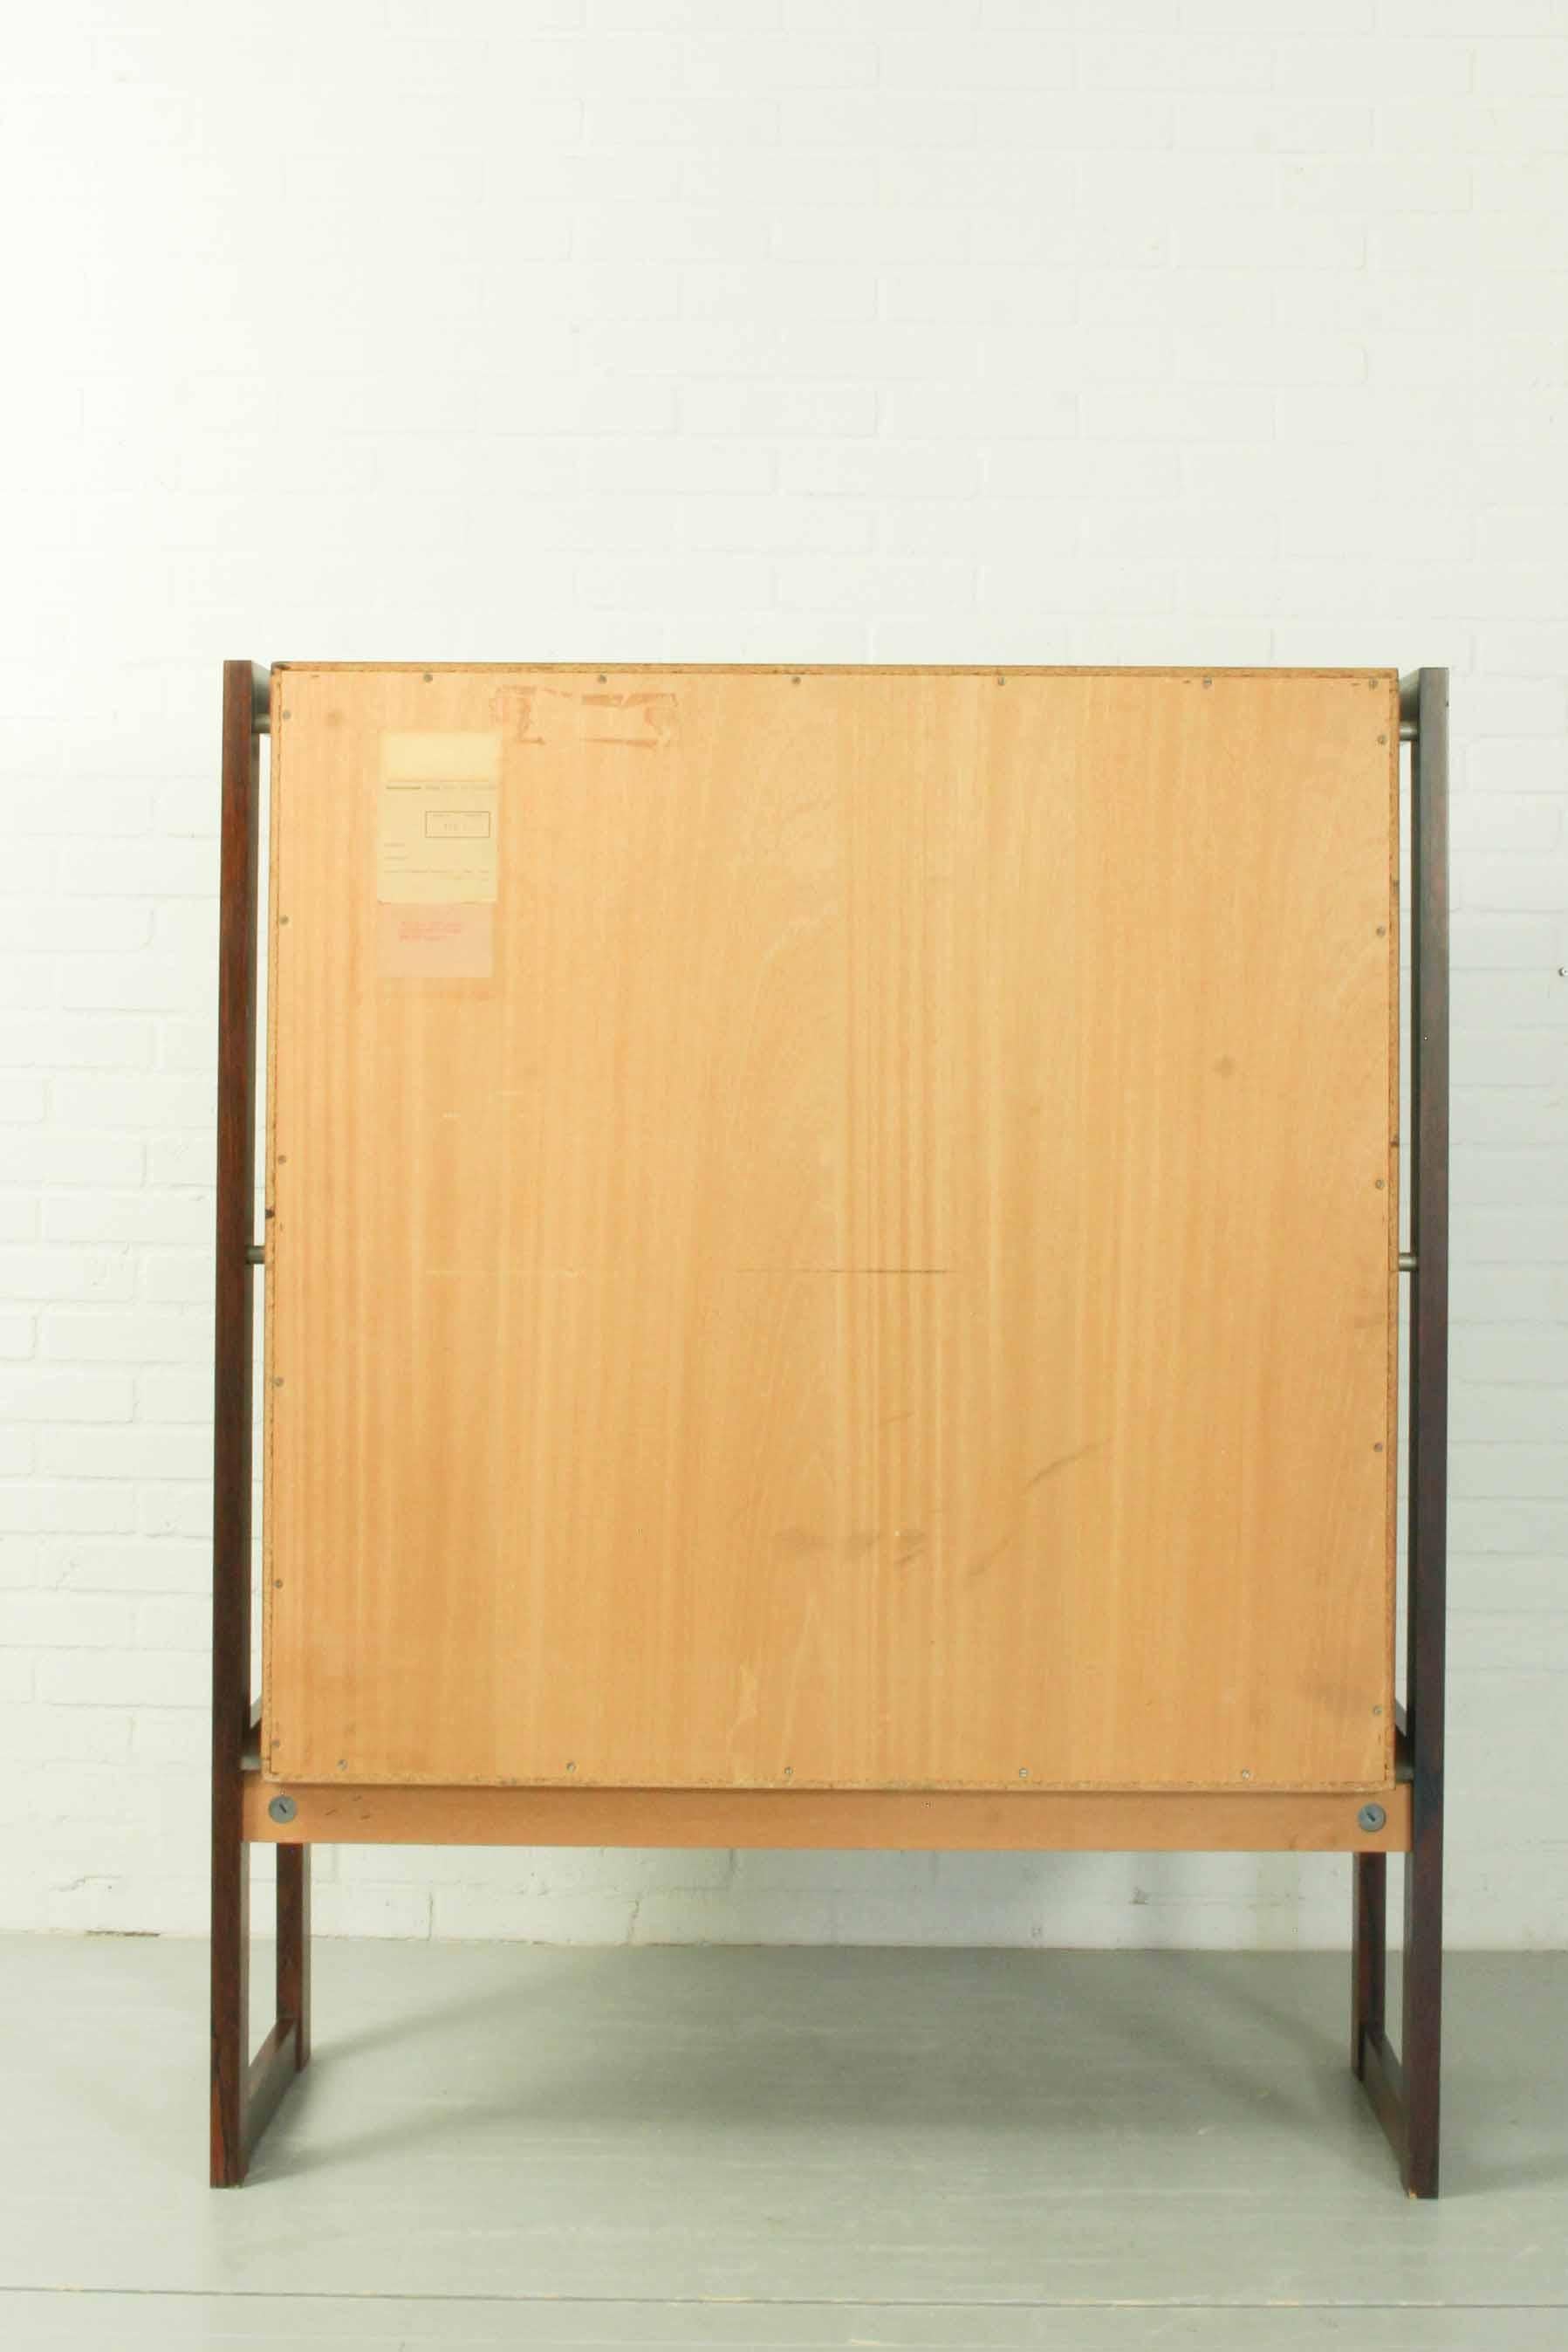 Rosewood Highboard “Malmo” Within Wood Frame, Executed in Rio Palissander, 1960s